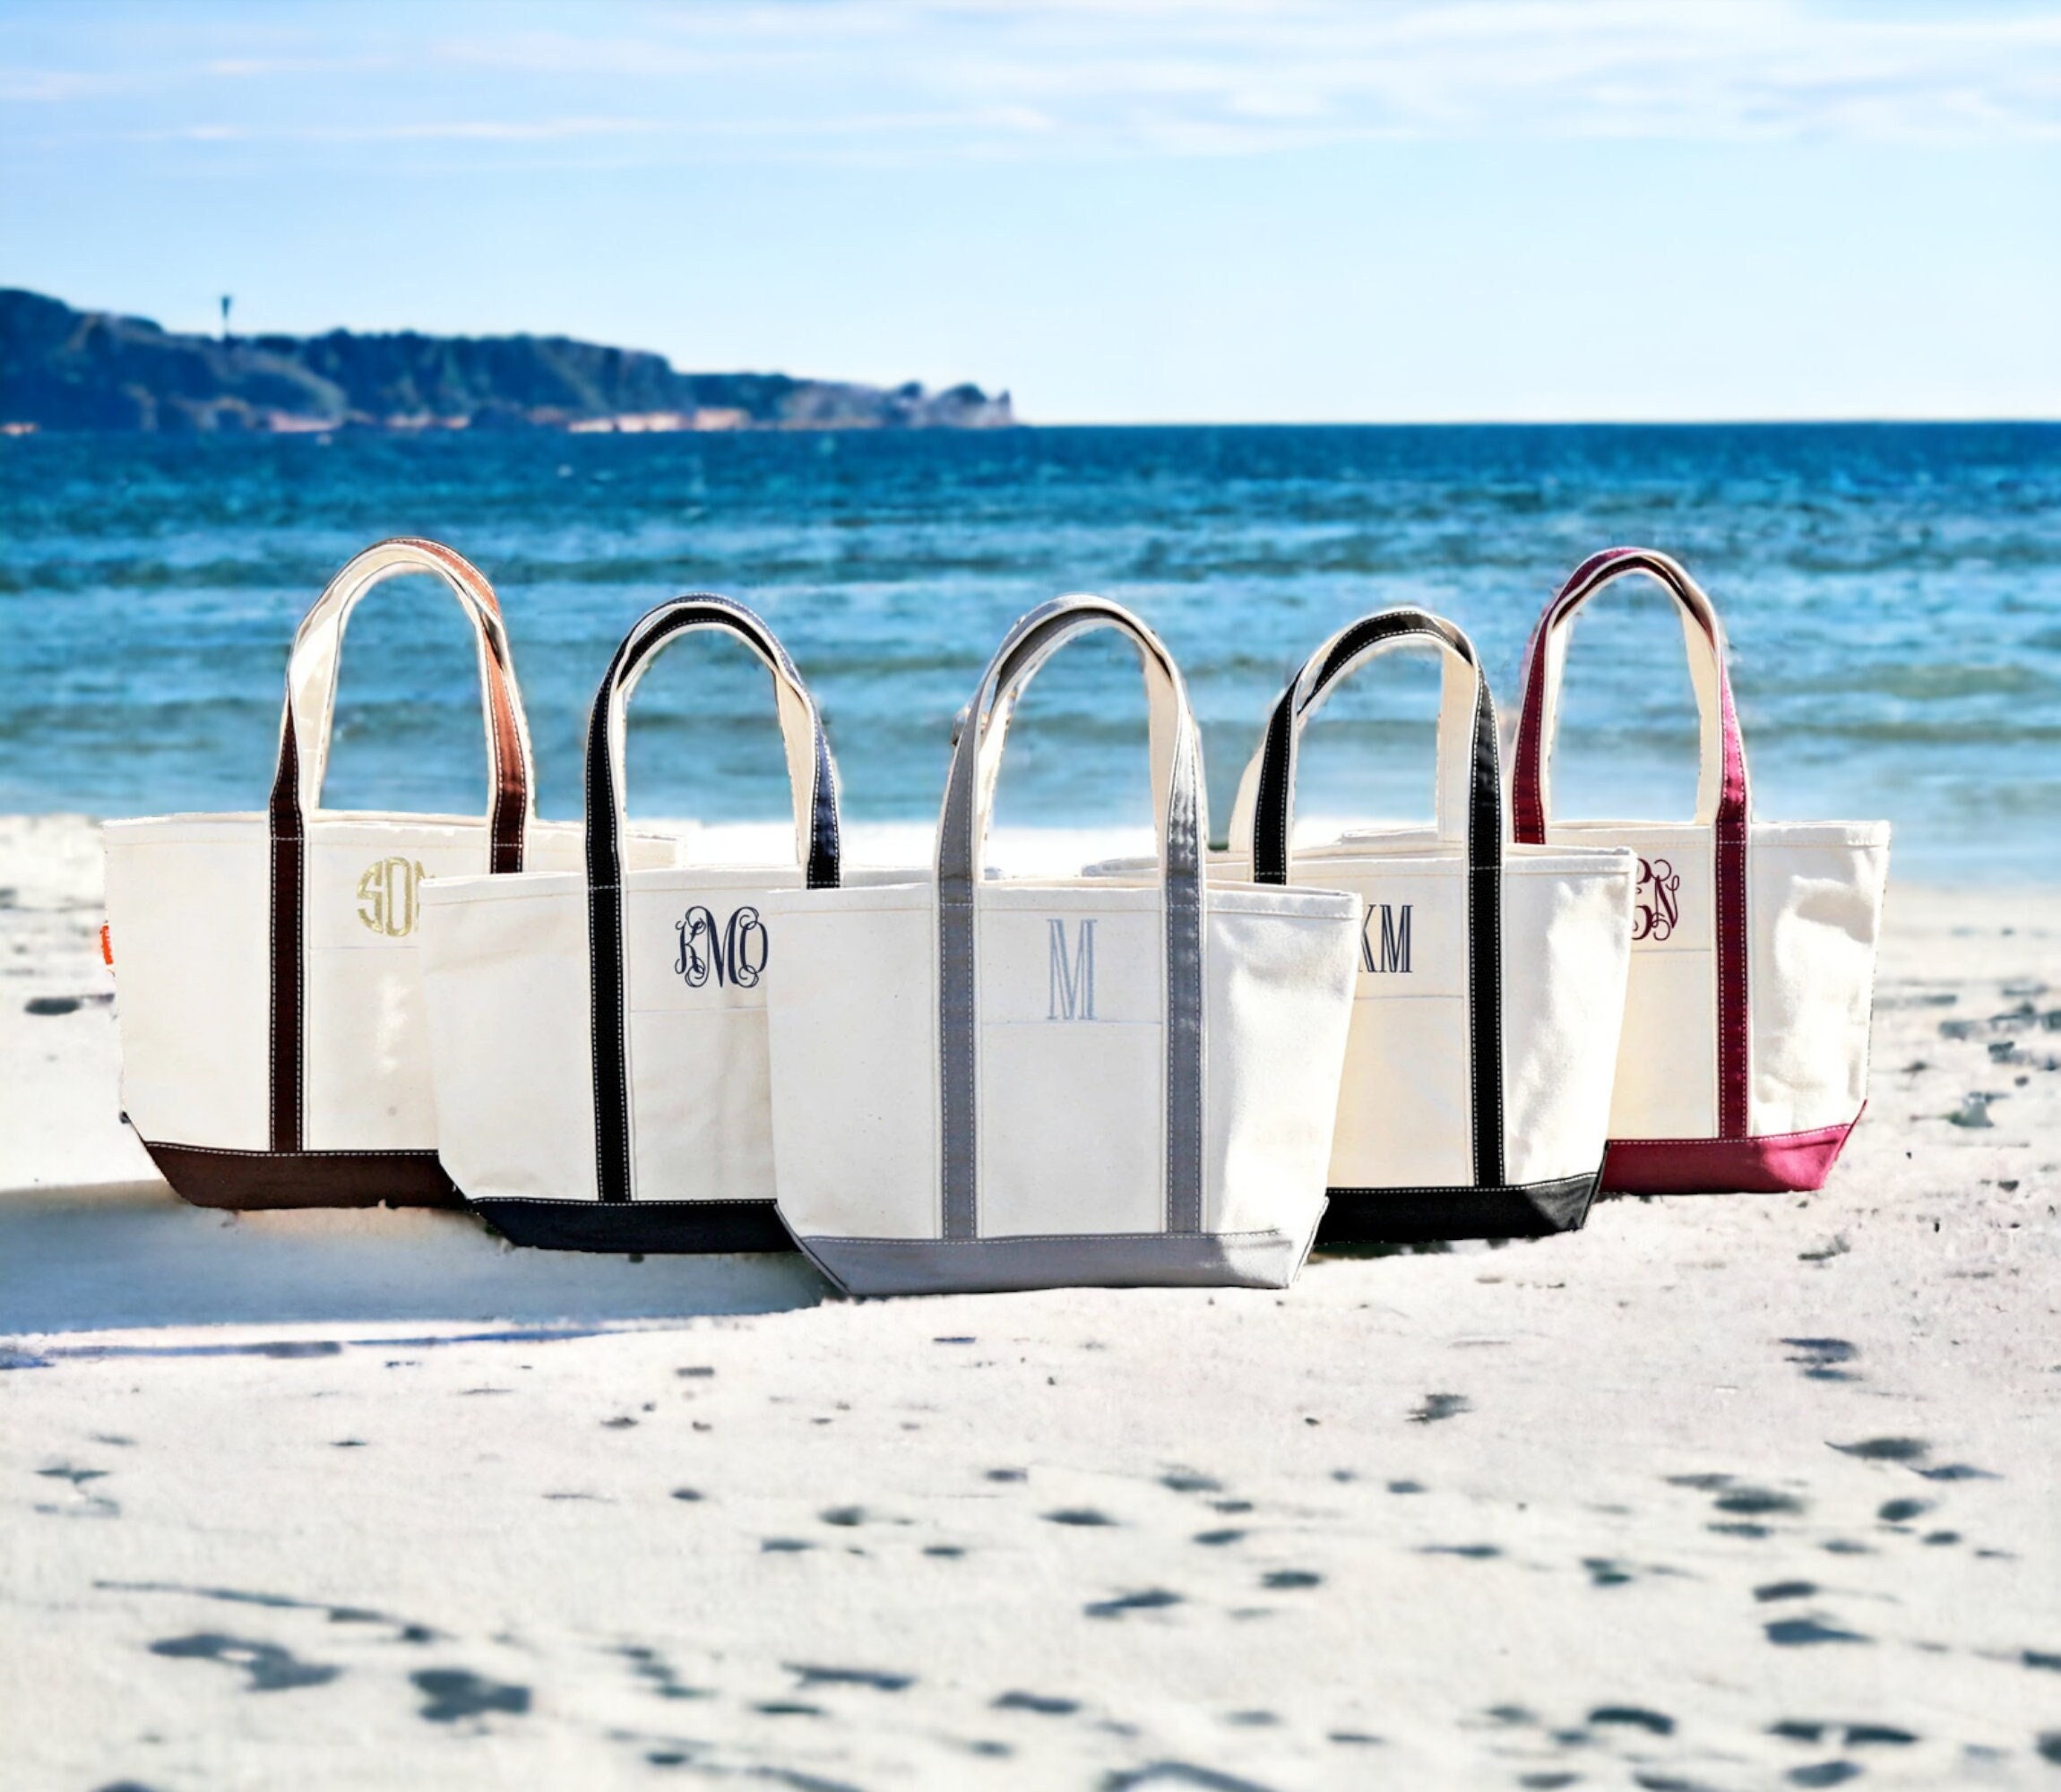 XL UTILITY TOTE FOR BEACH, VACATION, GROCERY WITH MONOGRAM!